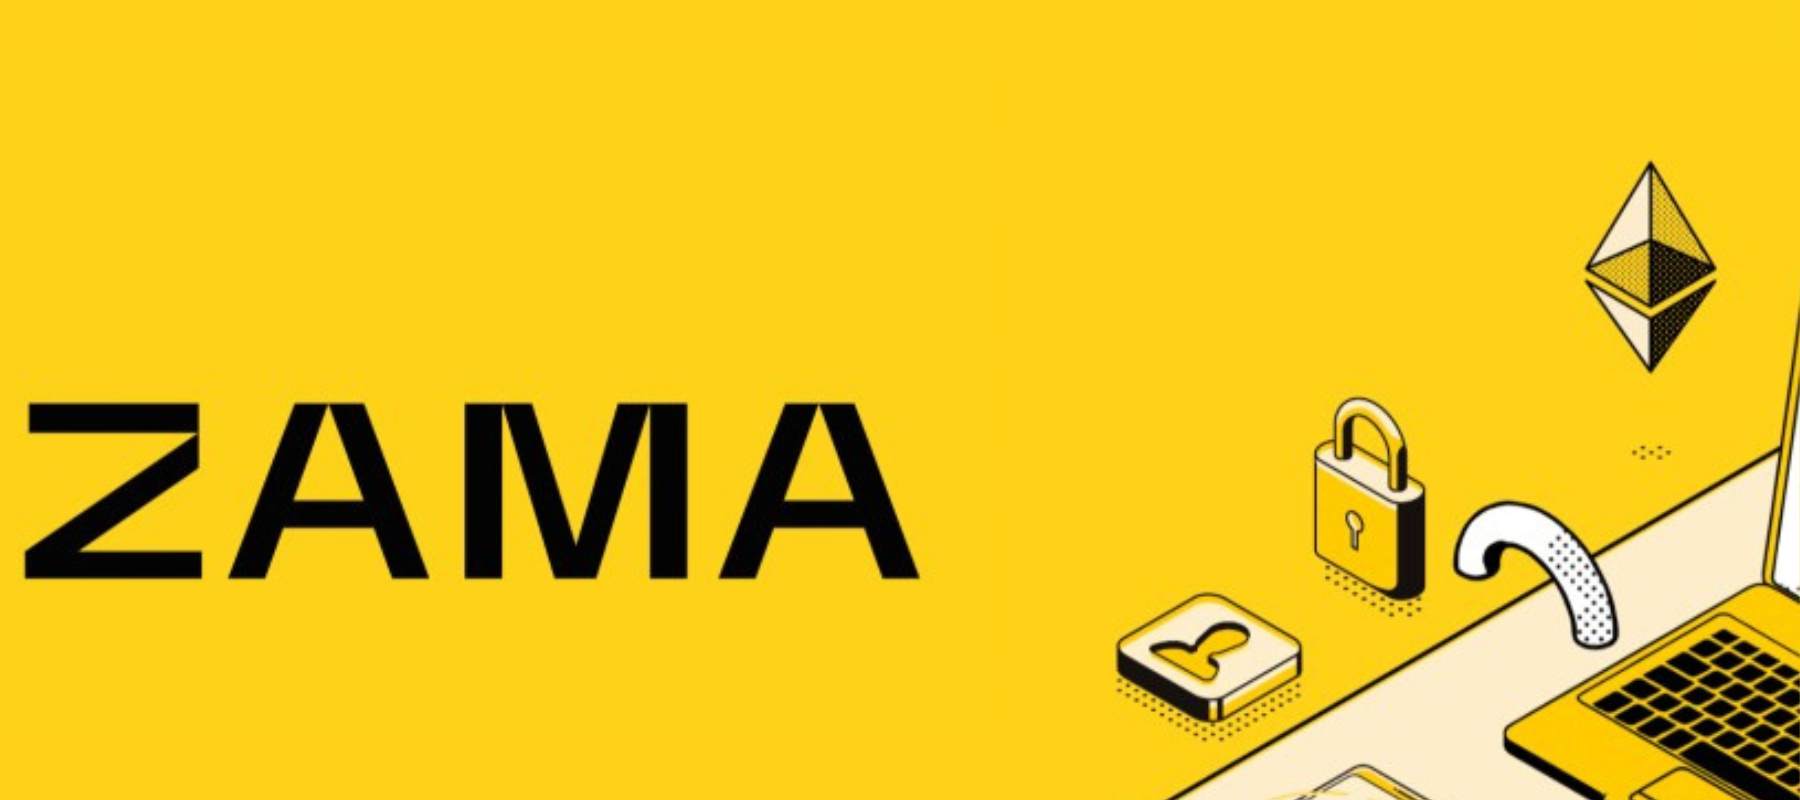 Open source cryptography startup Zama raises $73m Series A funding to commercialize fully homomorphic encryption